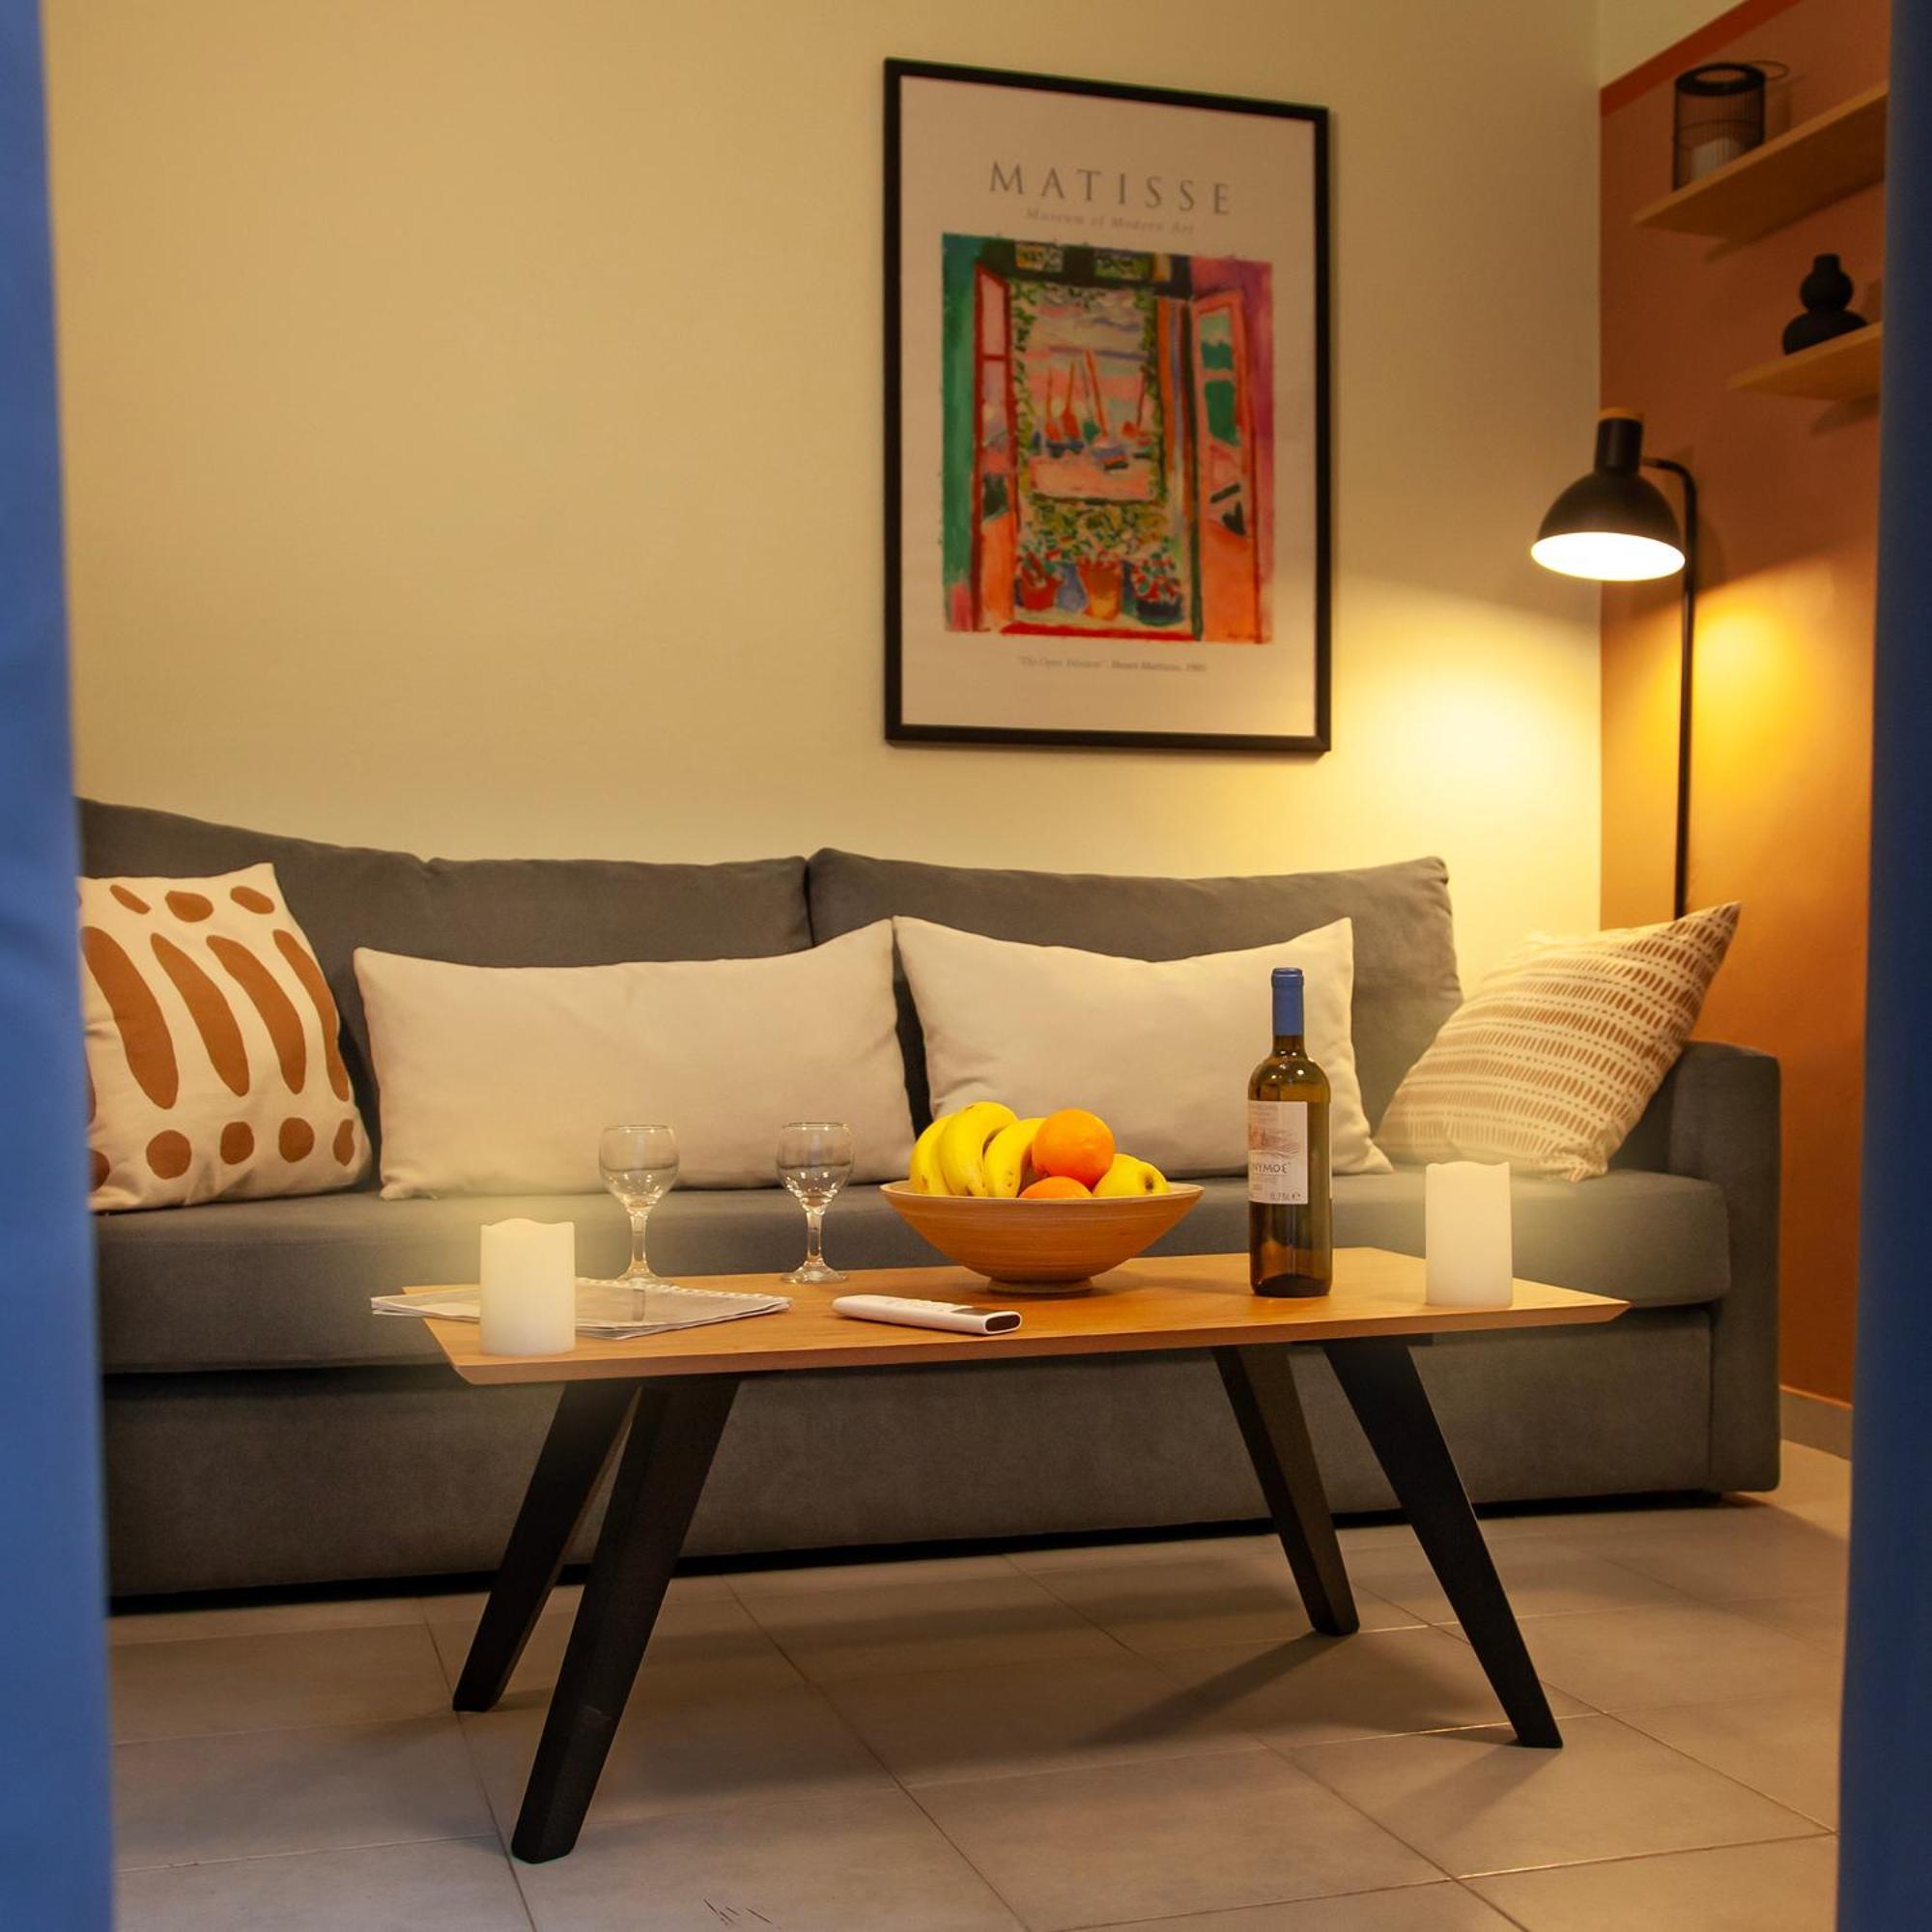 Aris123 By Smart Cozy Suites - Apartments In The Heart Of Athens - 5 Minutes From Metro - Available 24Hr 外观 照片